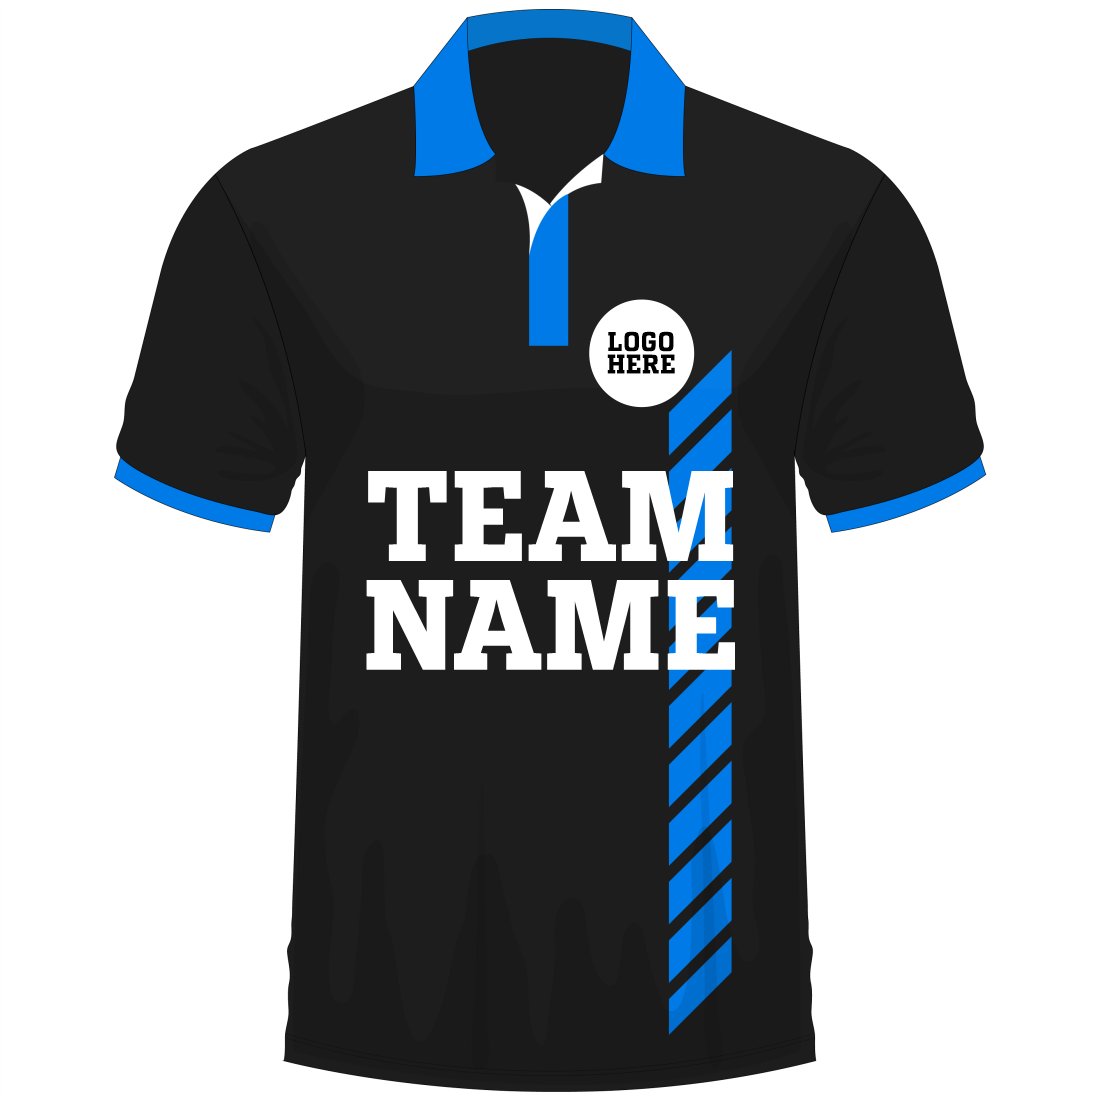 Cricket Customised Team Jersey with name ,number and logo 1029685762